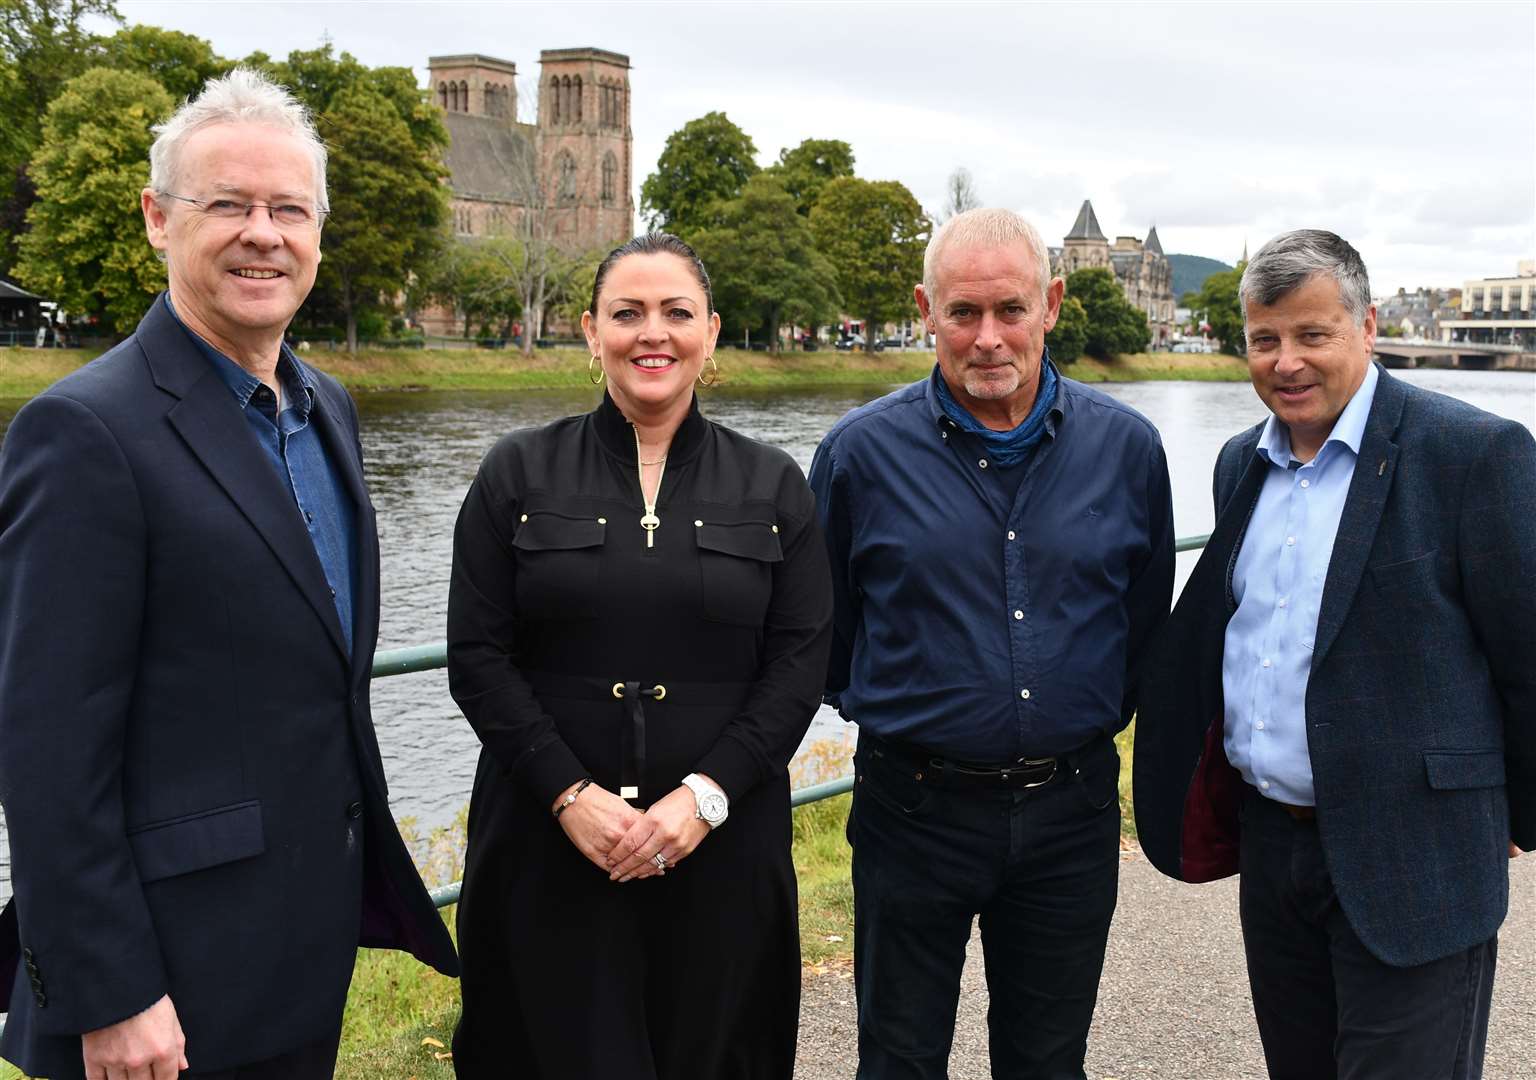 Scotland's Towns Partnership TCAP2 roadshow, Inverness. Some of the speakers, from left: Bryan Beattie (Inverness Castle), Kimberley Guthrie (STP), Phil Prentice (STP) and John Murray (Highland Food and Drink Club). August 24 2022